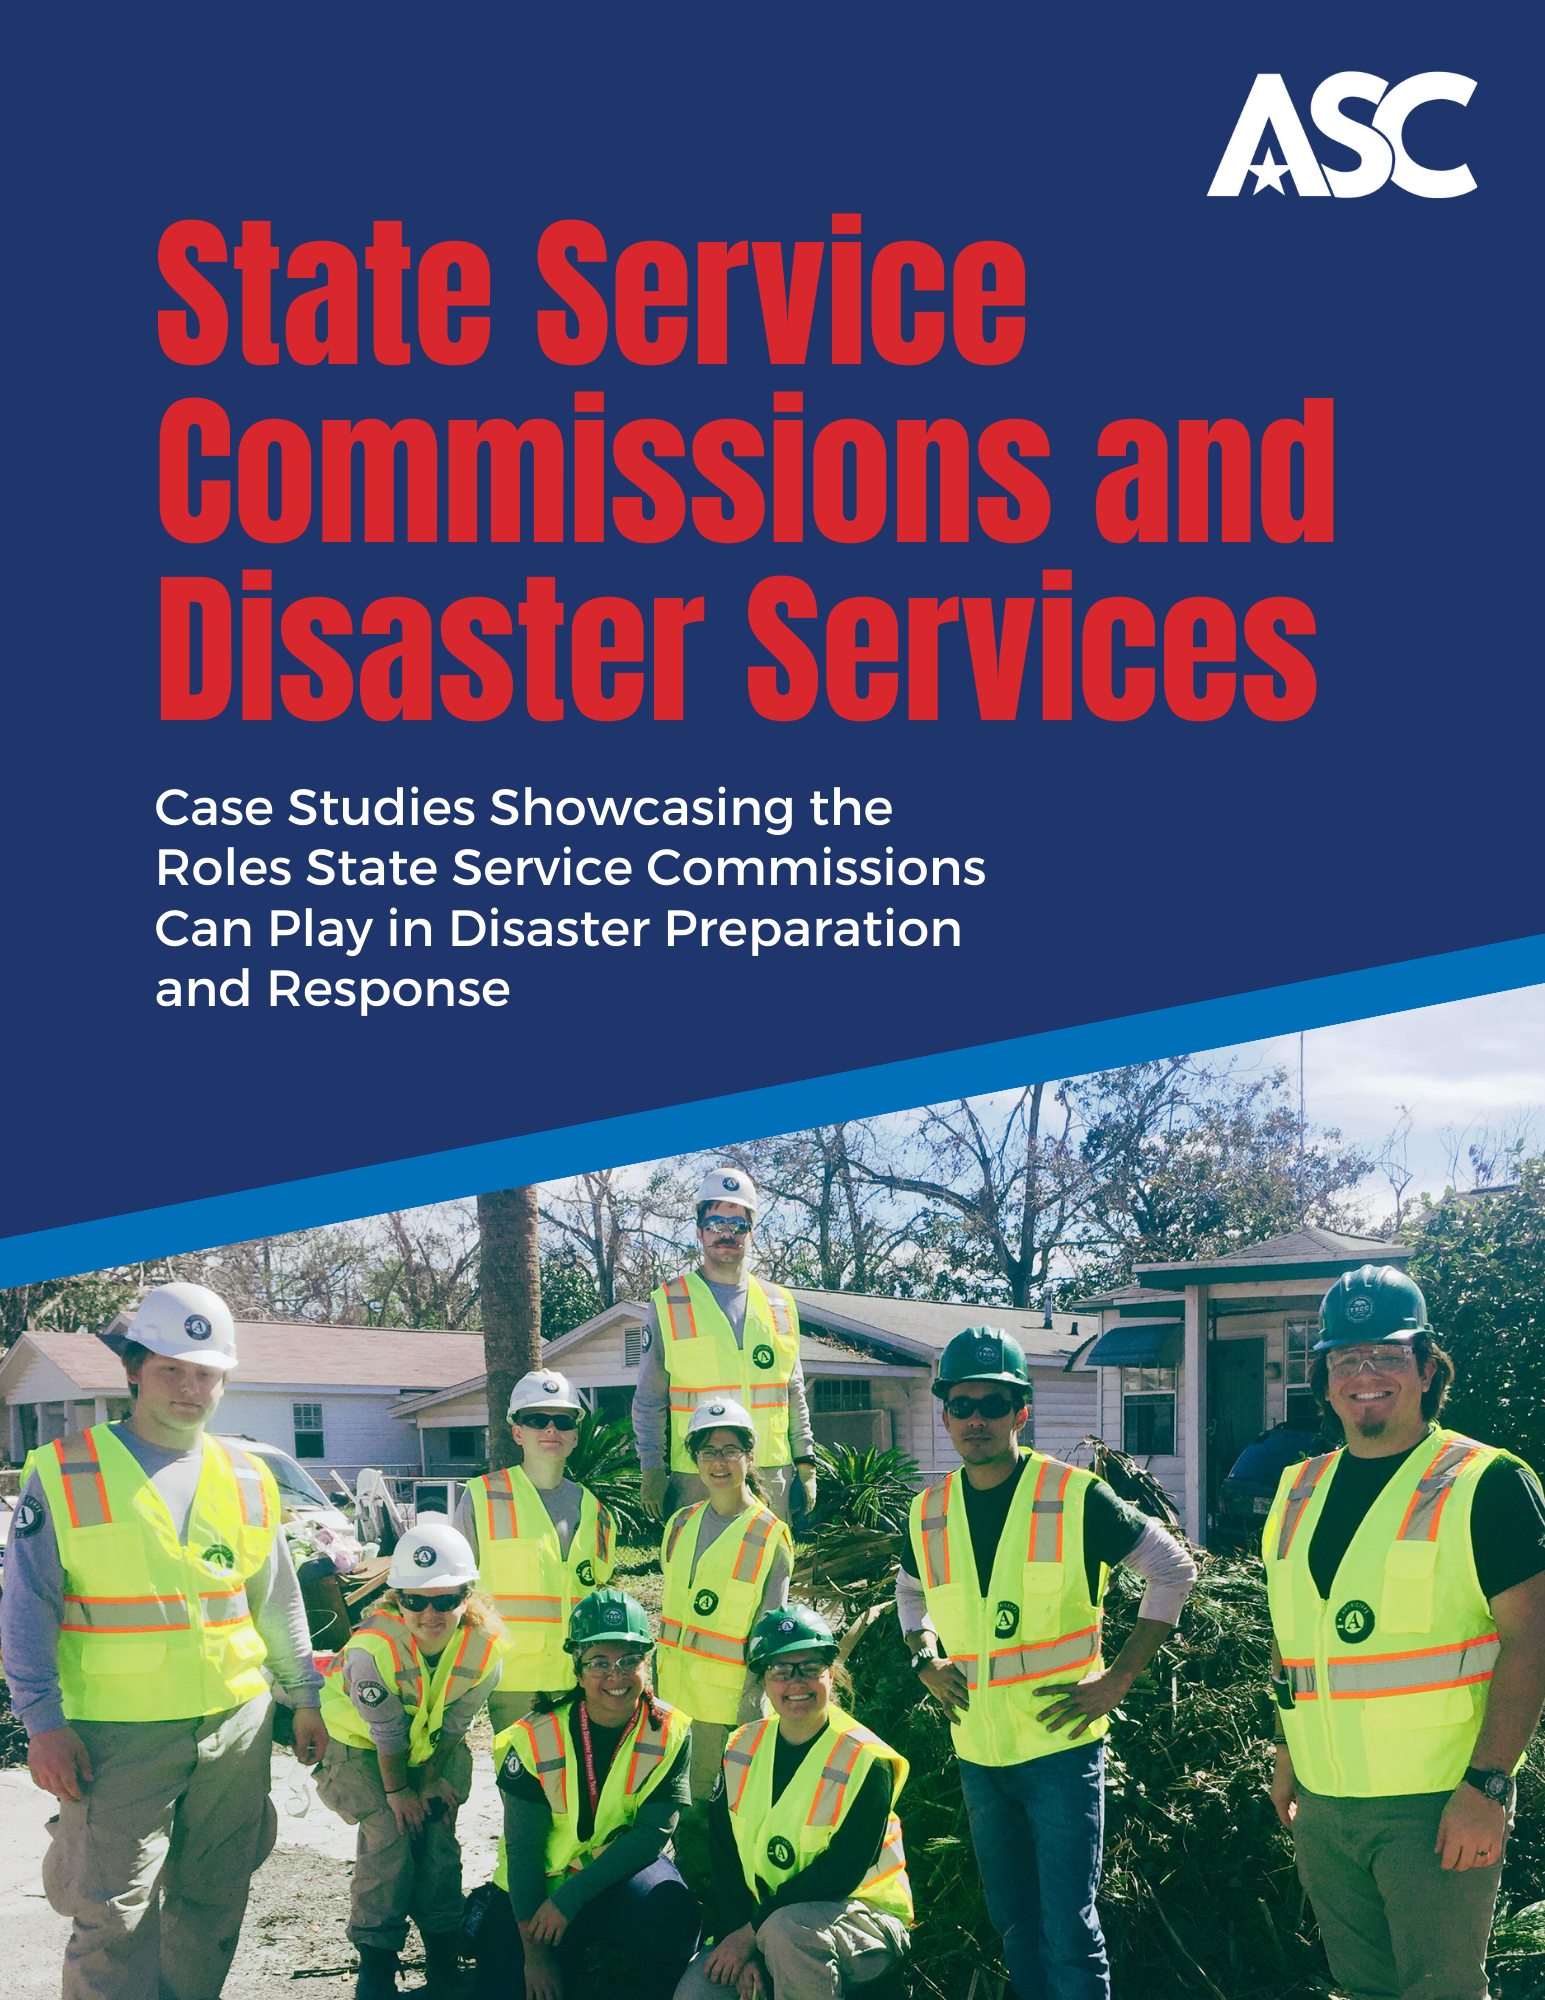 Decorative image. Front cover of State Service Commissions and Disaster Services publication